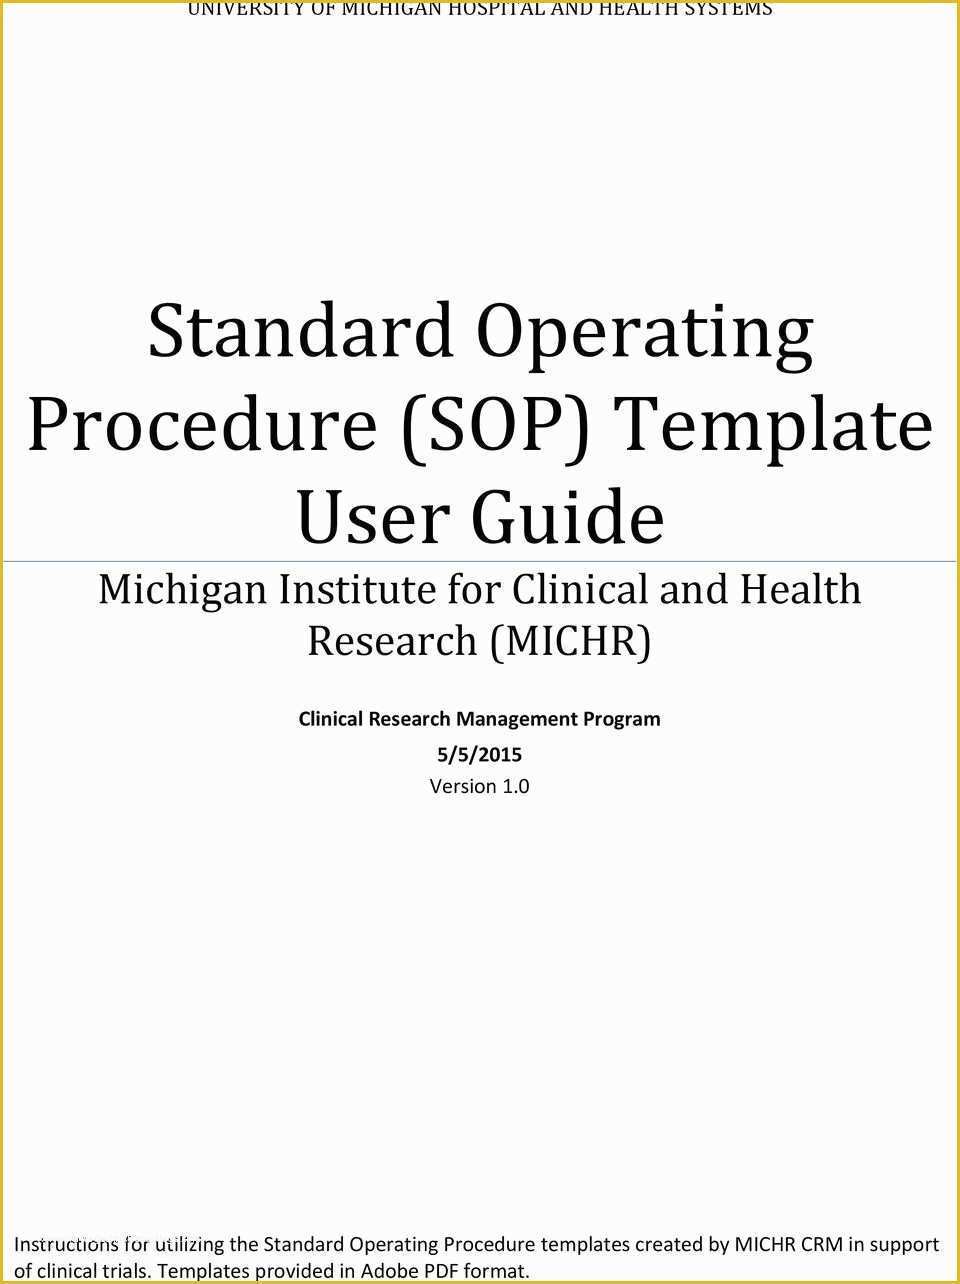 Clinical Research sop Template Free Of Standard Operating Procedure sop Template User Guide